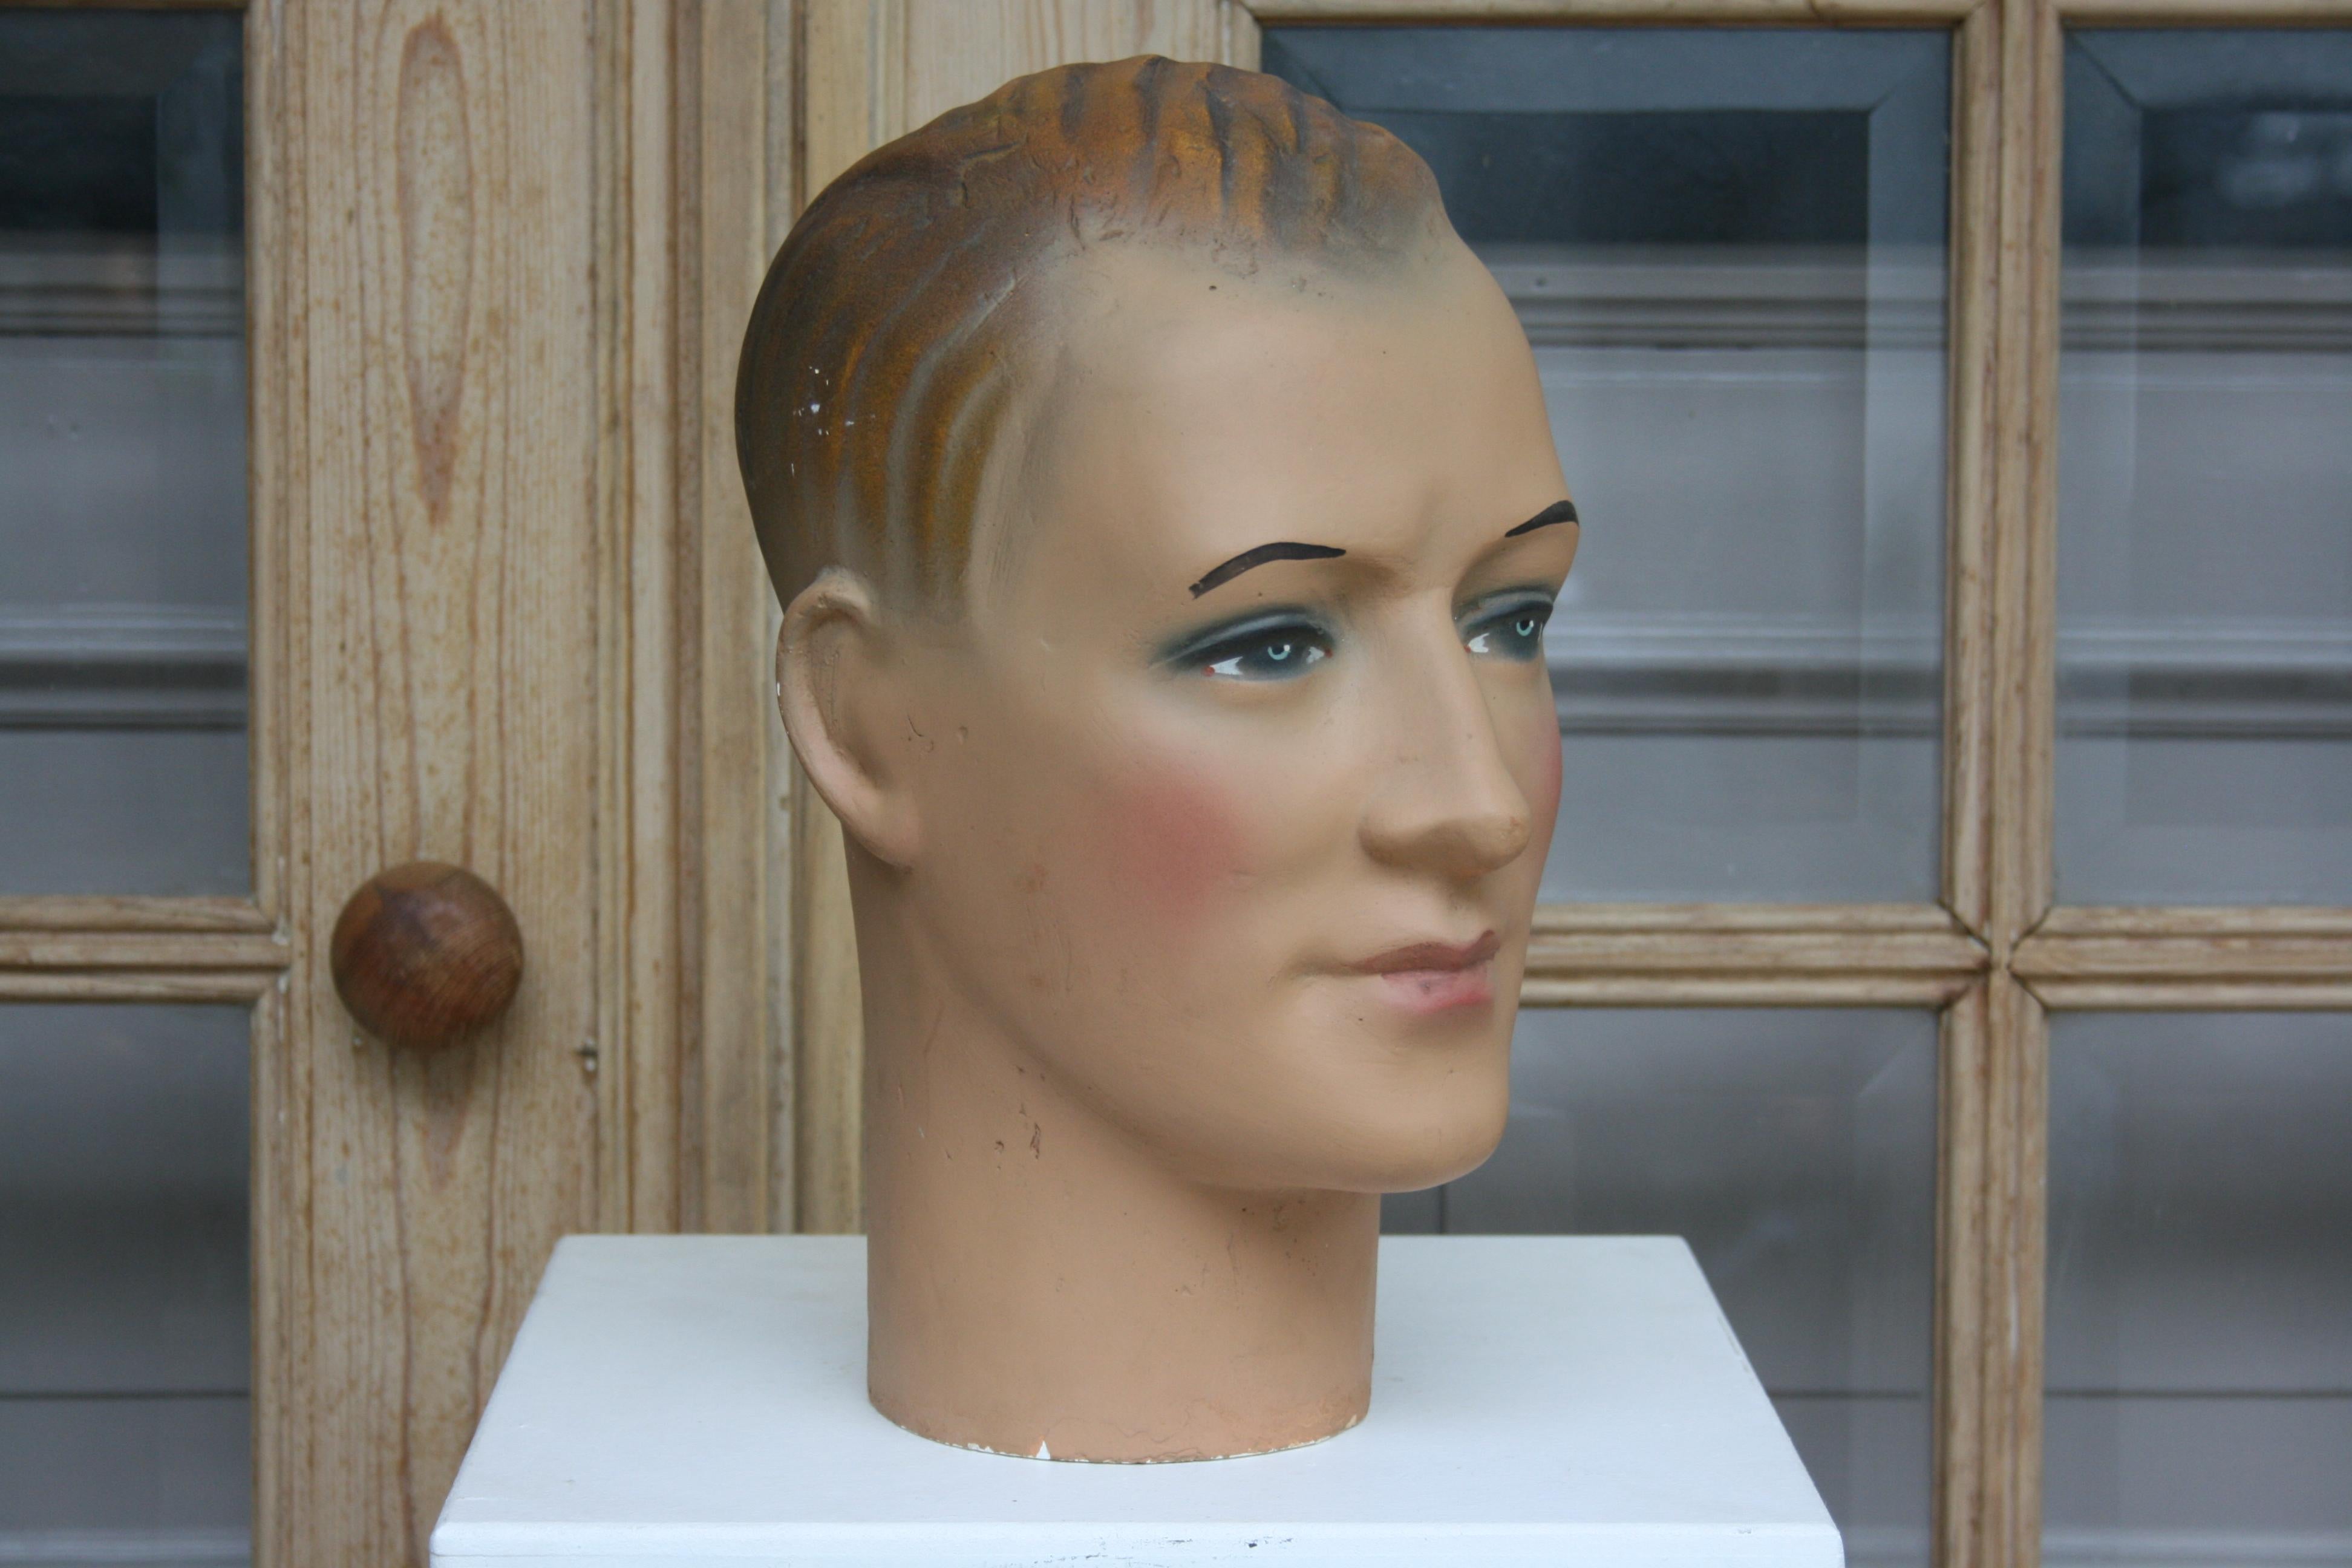 The mannequin head of a young man dates back to the 1930s of the 20th century and is made of plaster. It is painted polychrome. The man is wearing makeup and has painted eyes.

Dimensions:
31 cm high / 12.2 inch high,
17 cm wide / 6.69 inch